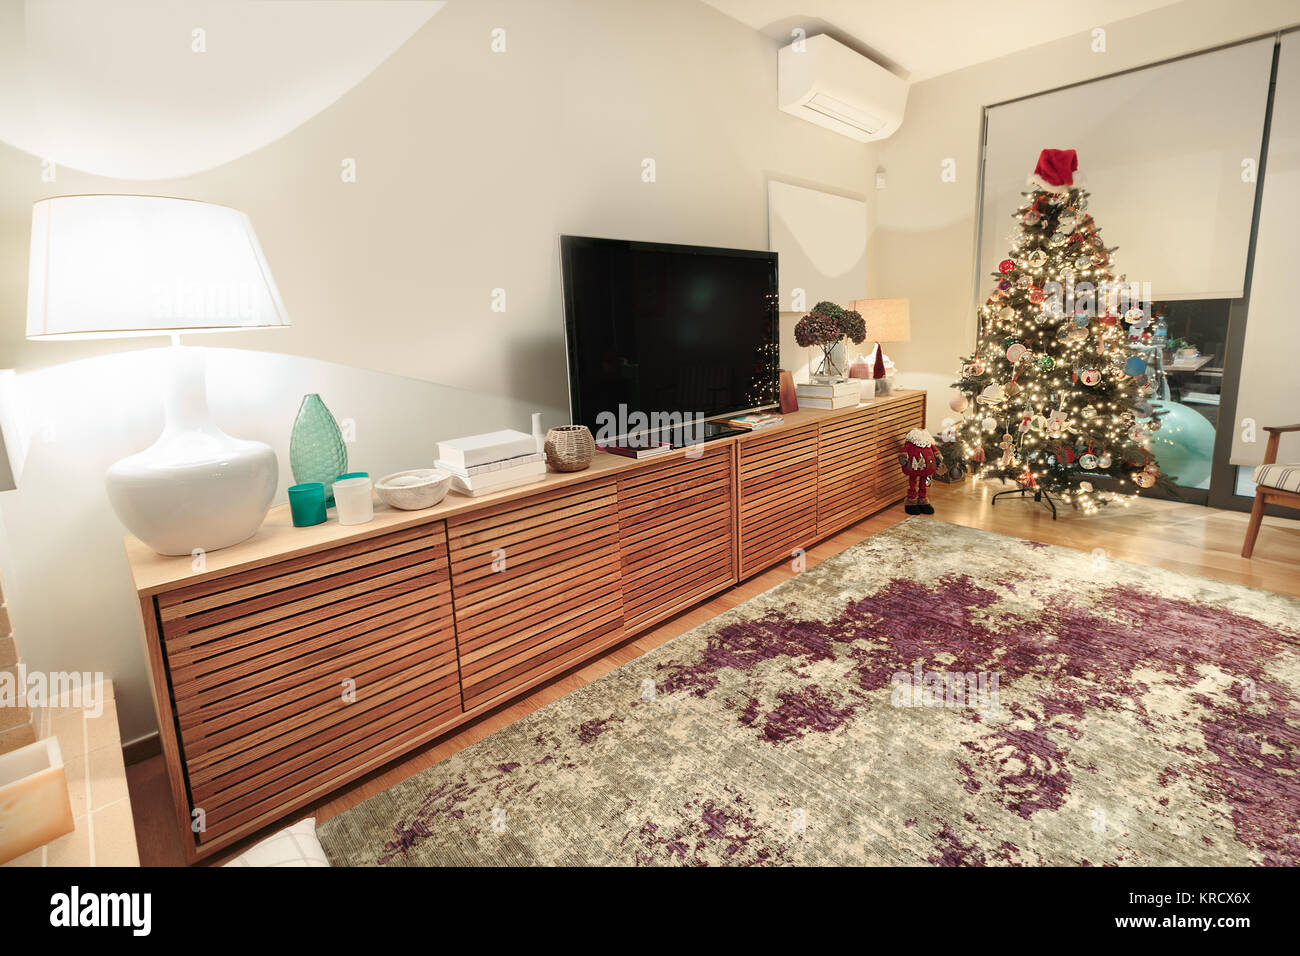 A modern large wooden cabinet with a flat TV placed on a living room with a christmas tree. Stock Photo